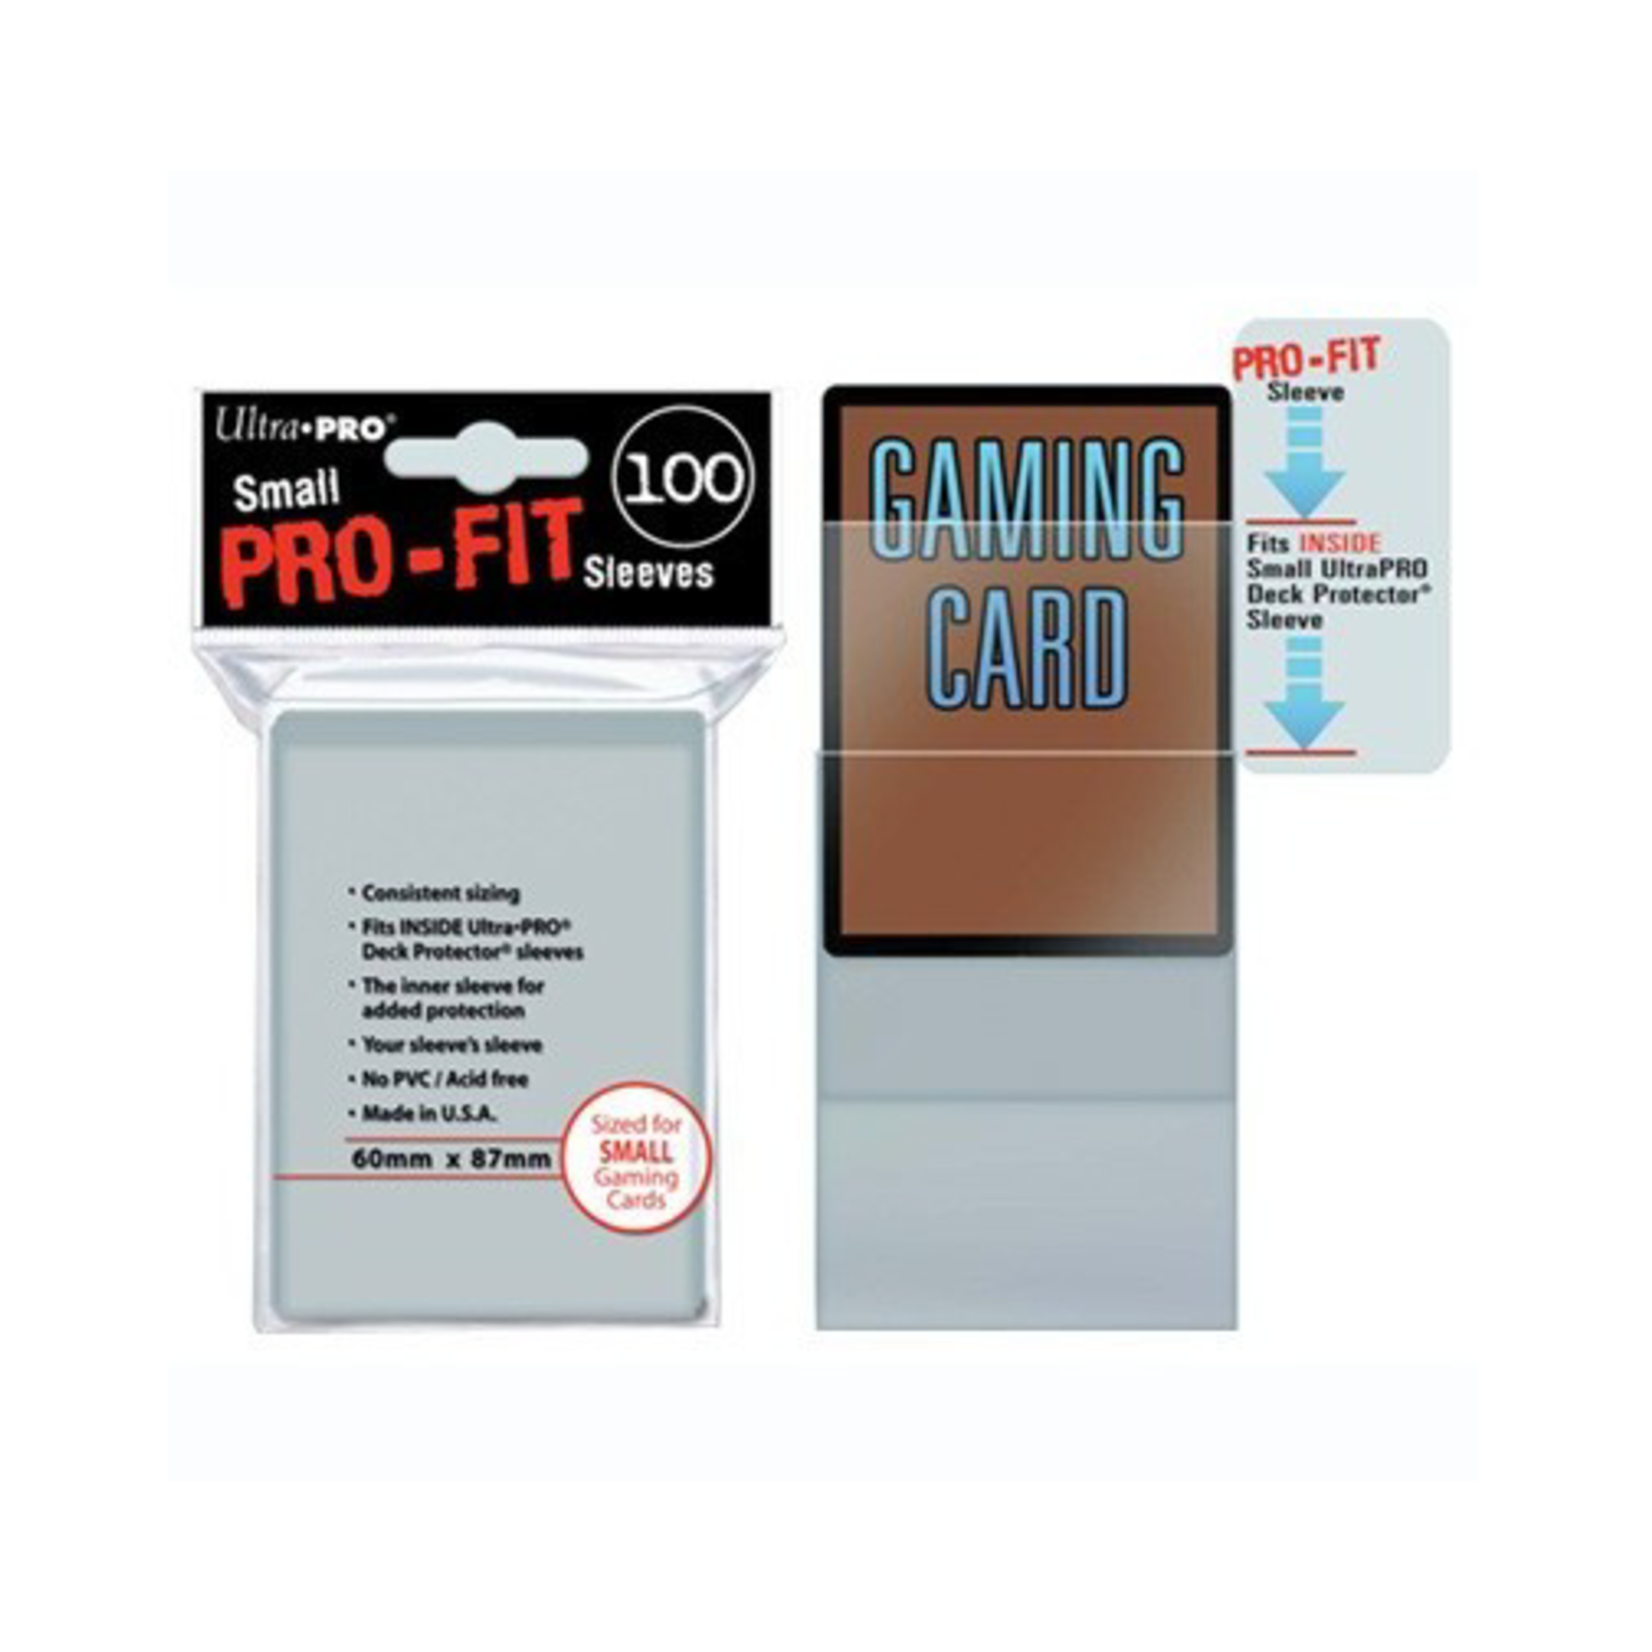 Ultra Pro Small Sleeves - Pro-Fit Card (100)